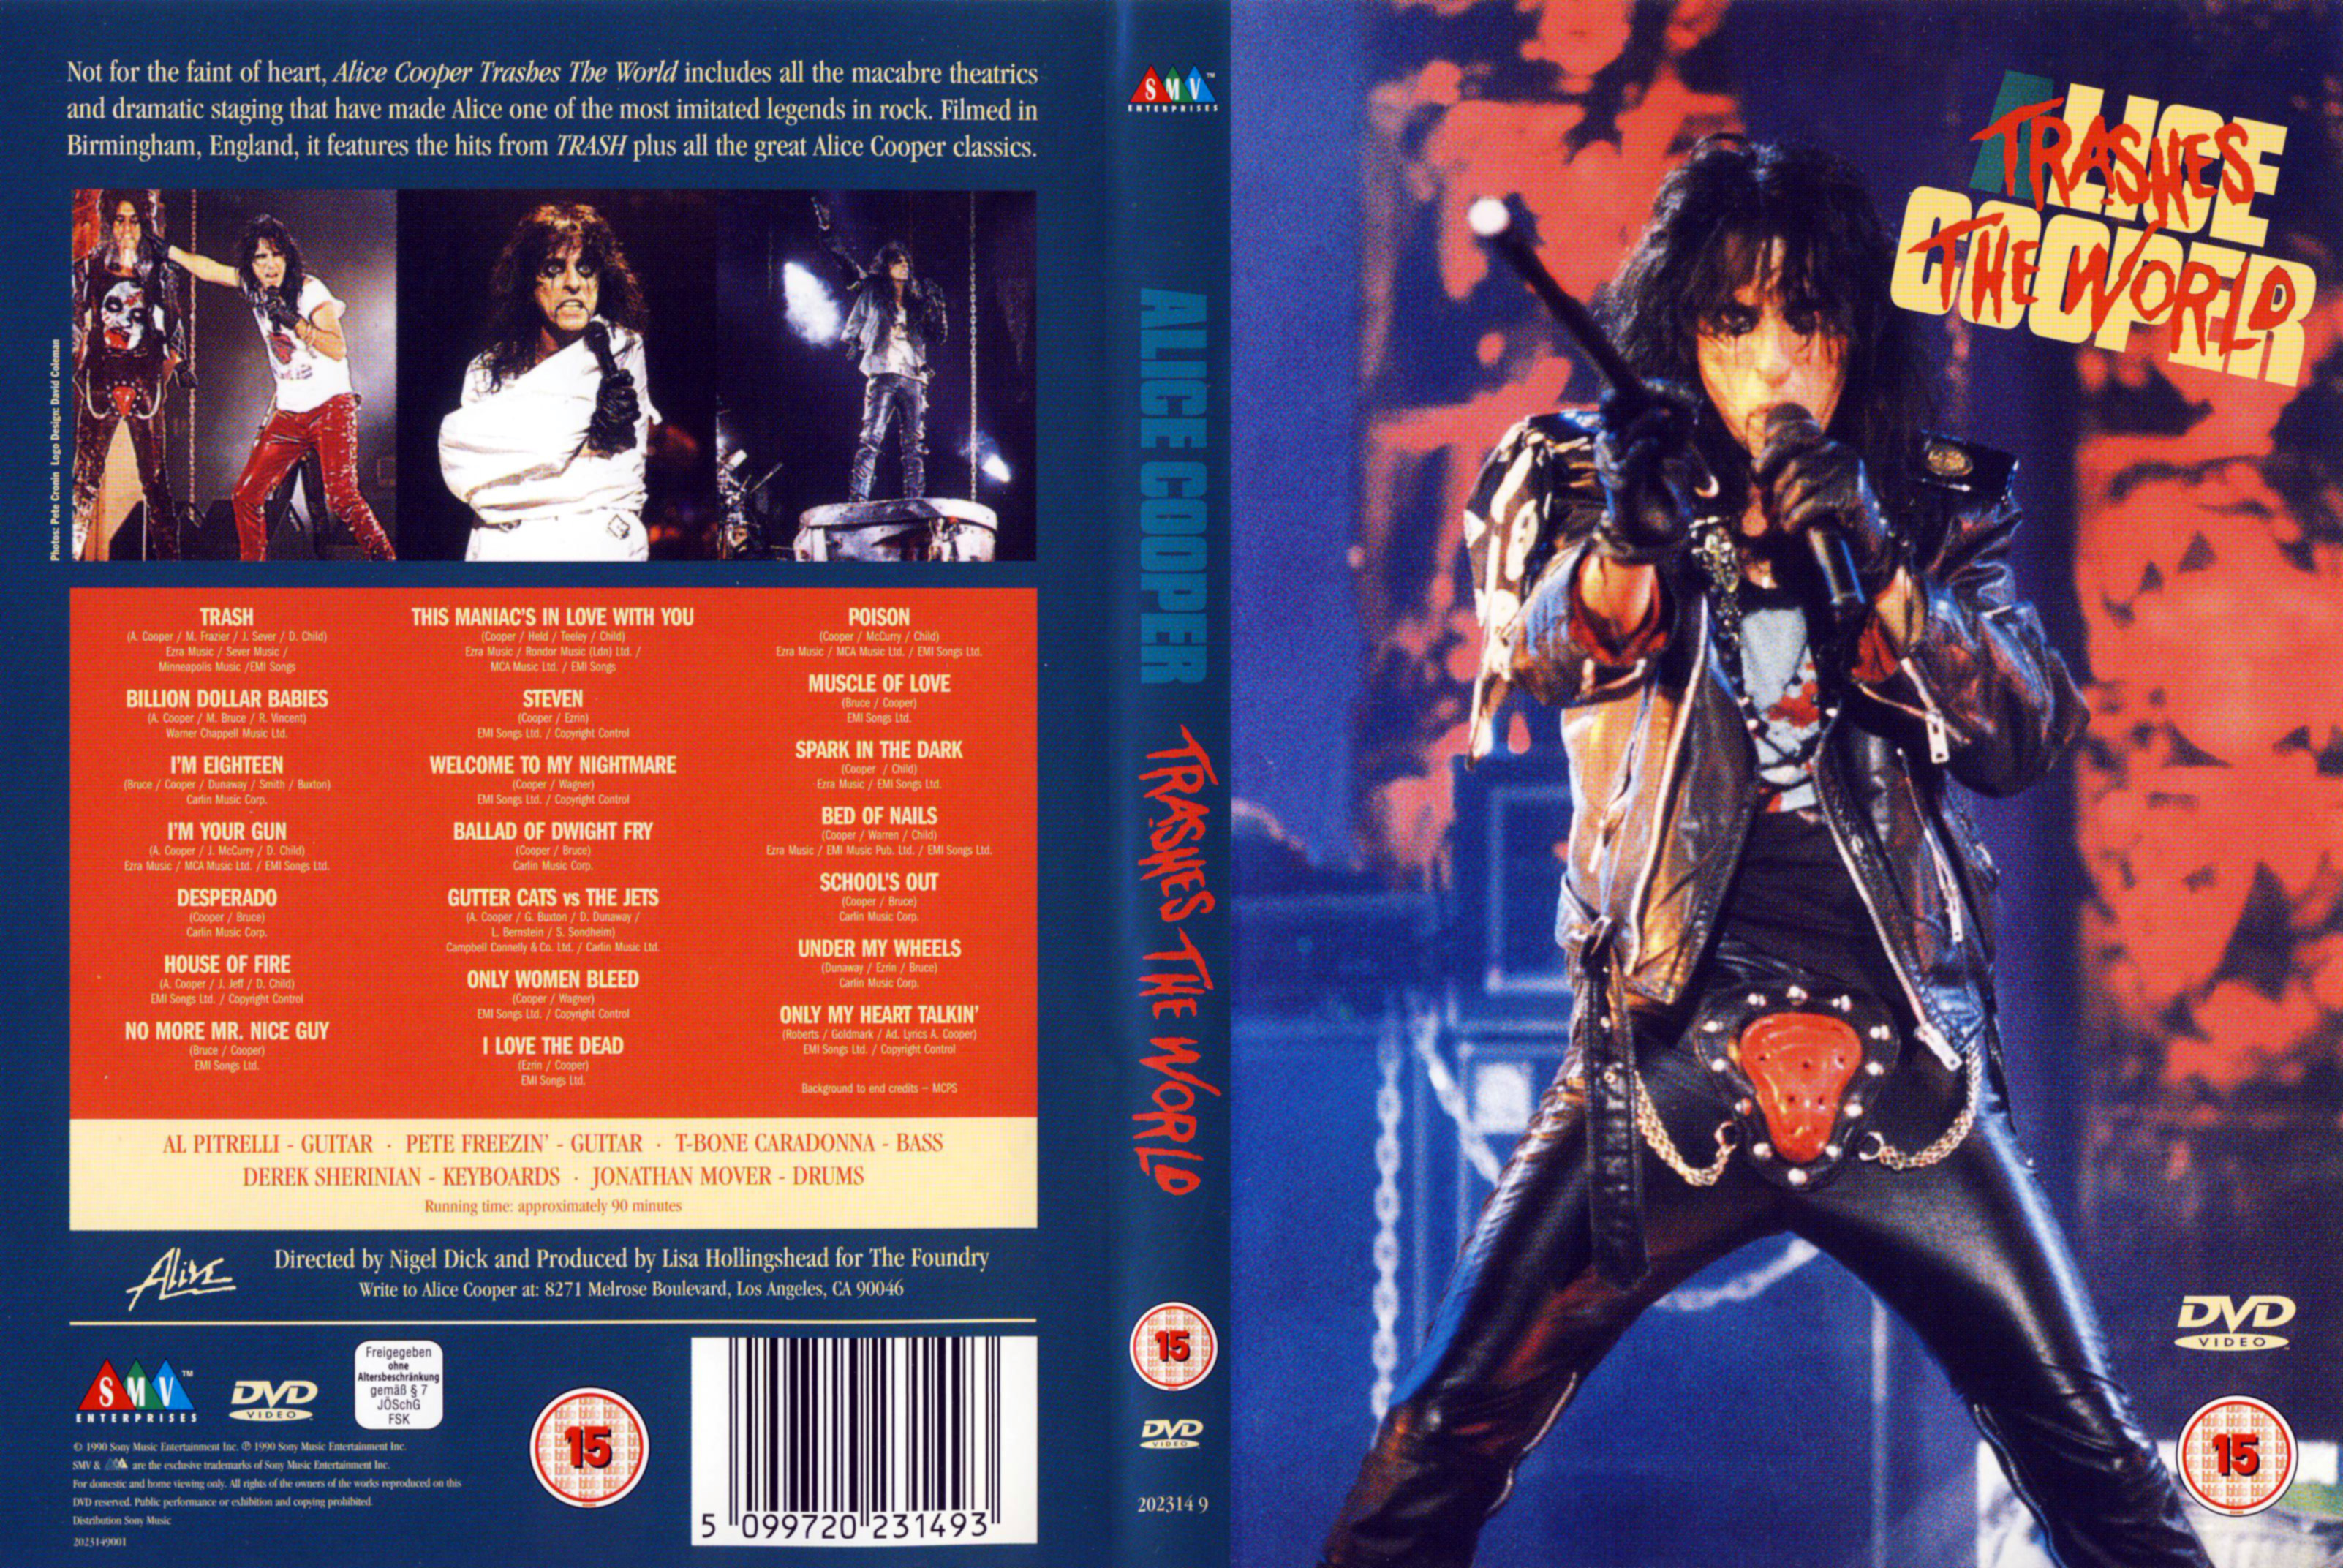 Jaquette DVD Alice Cooper Trashes the world